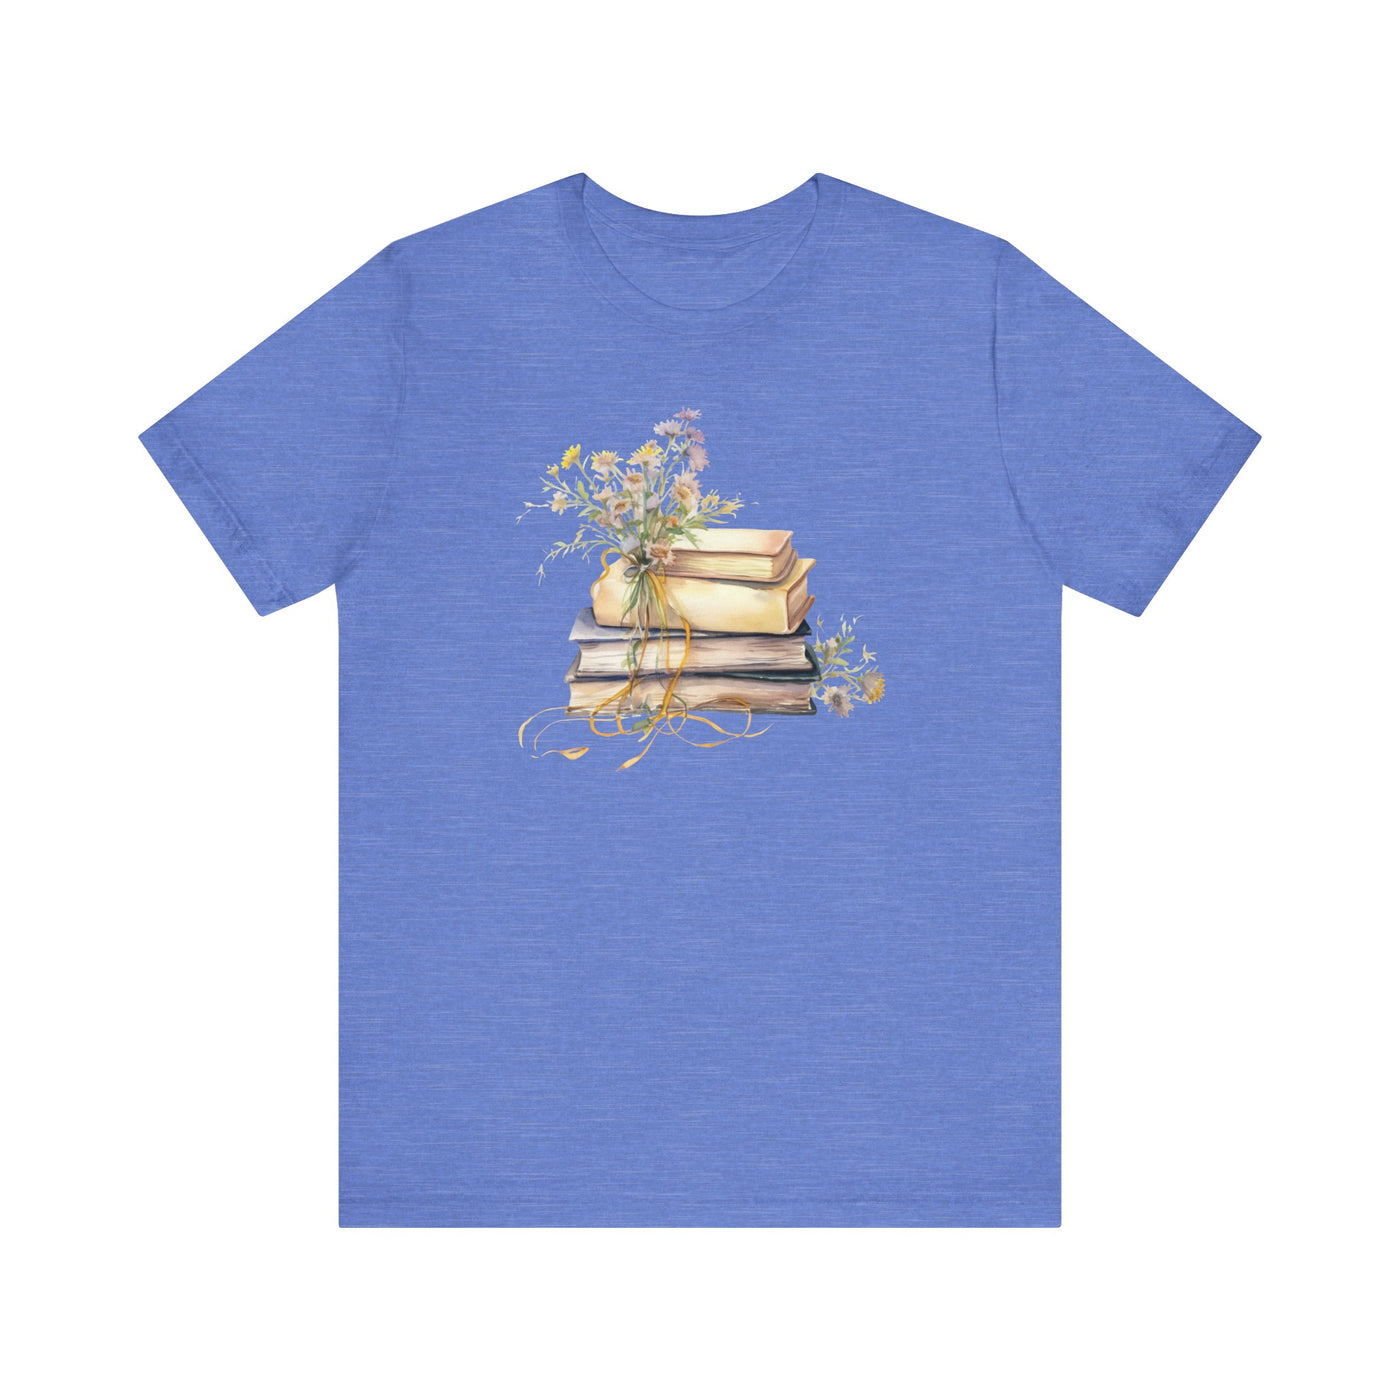 🔥 Wildflowers and Books Cozy T-Shirt